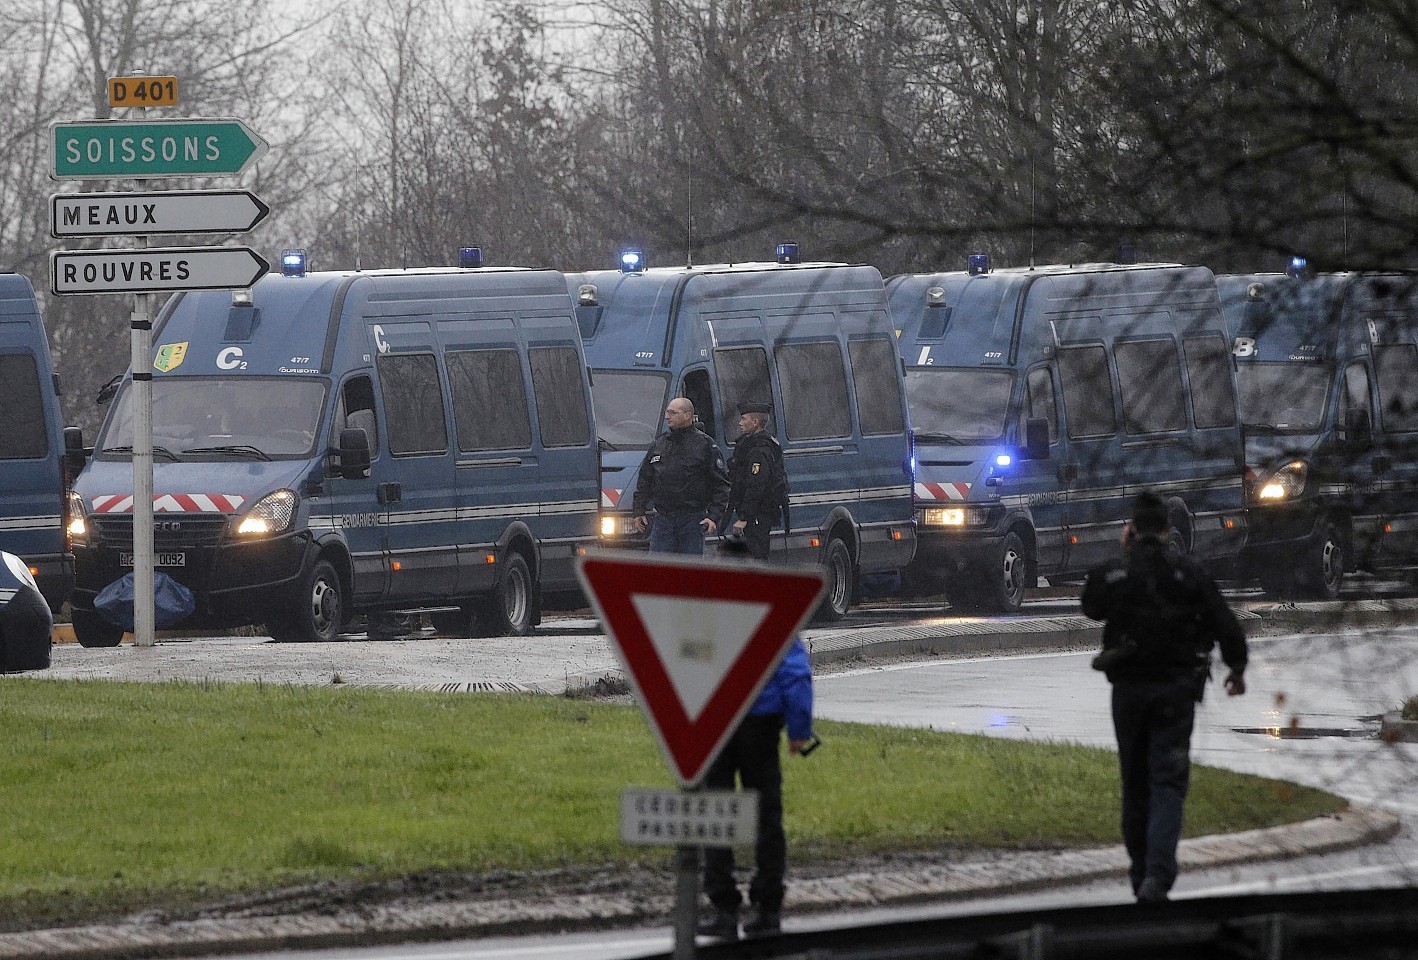 Police vans are lined up in Dammartin-en-Goele, northeast Paris, as part of an operation to seize two heavily armed suspects, 